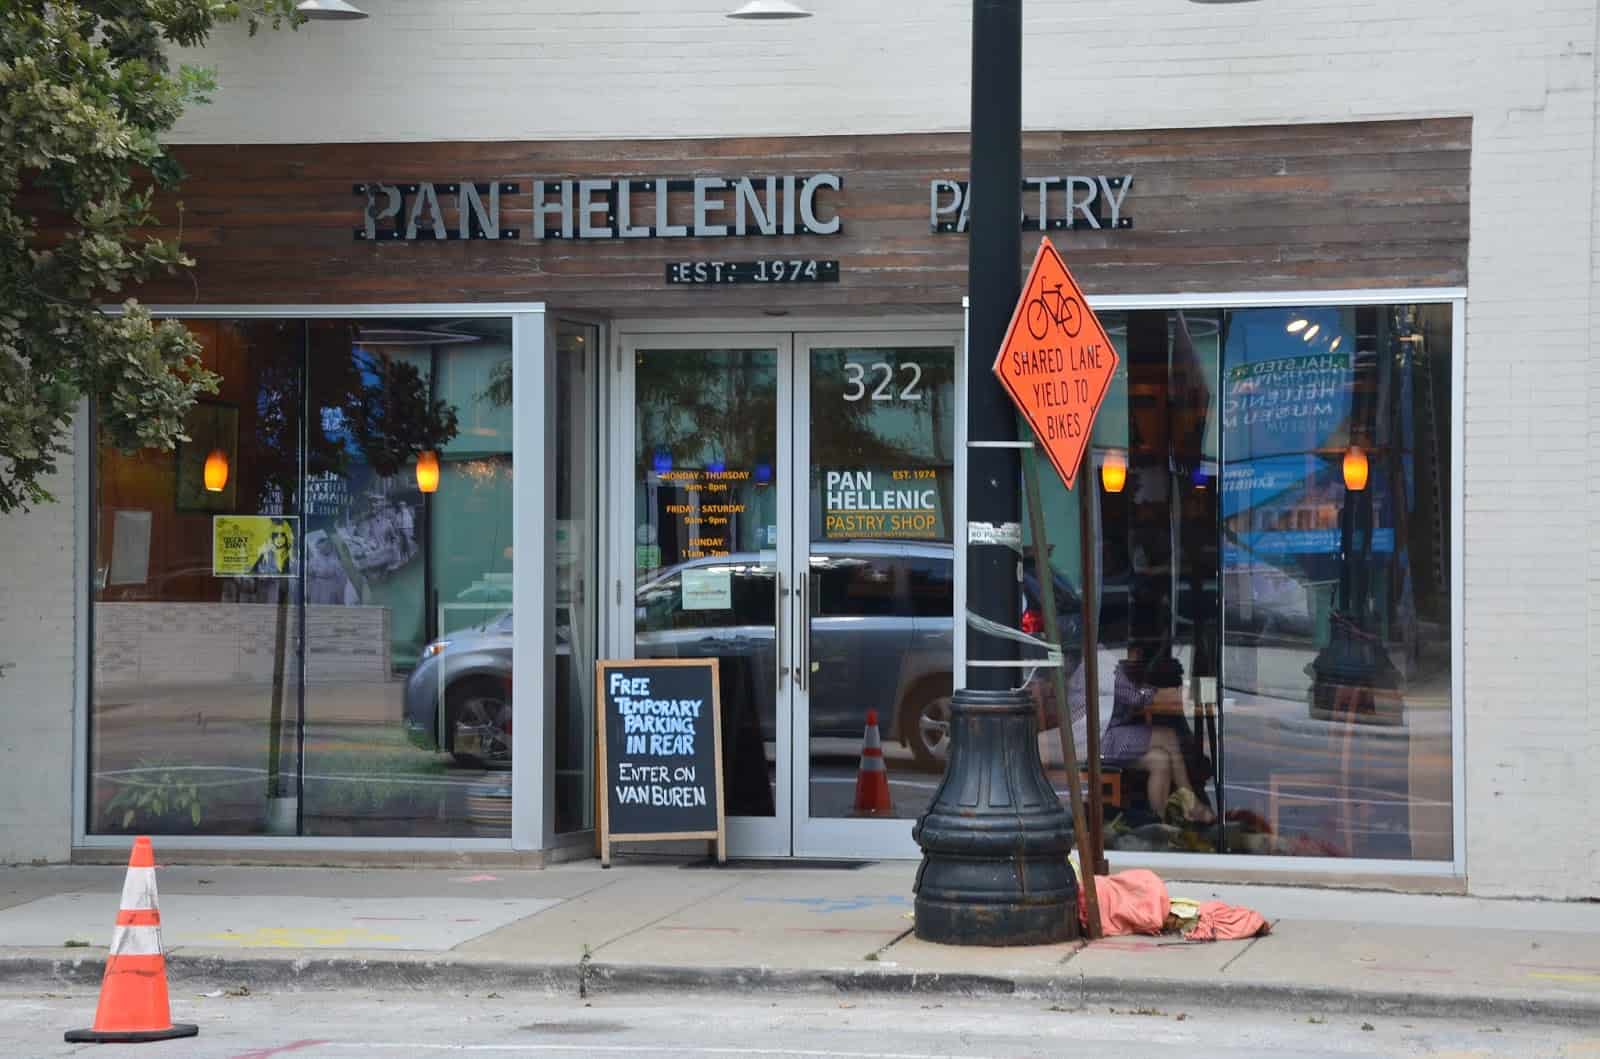 Pan Hellenic Pastry Shop in Greektown Chicago